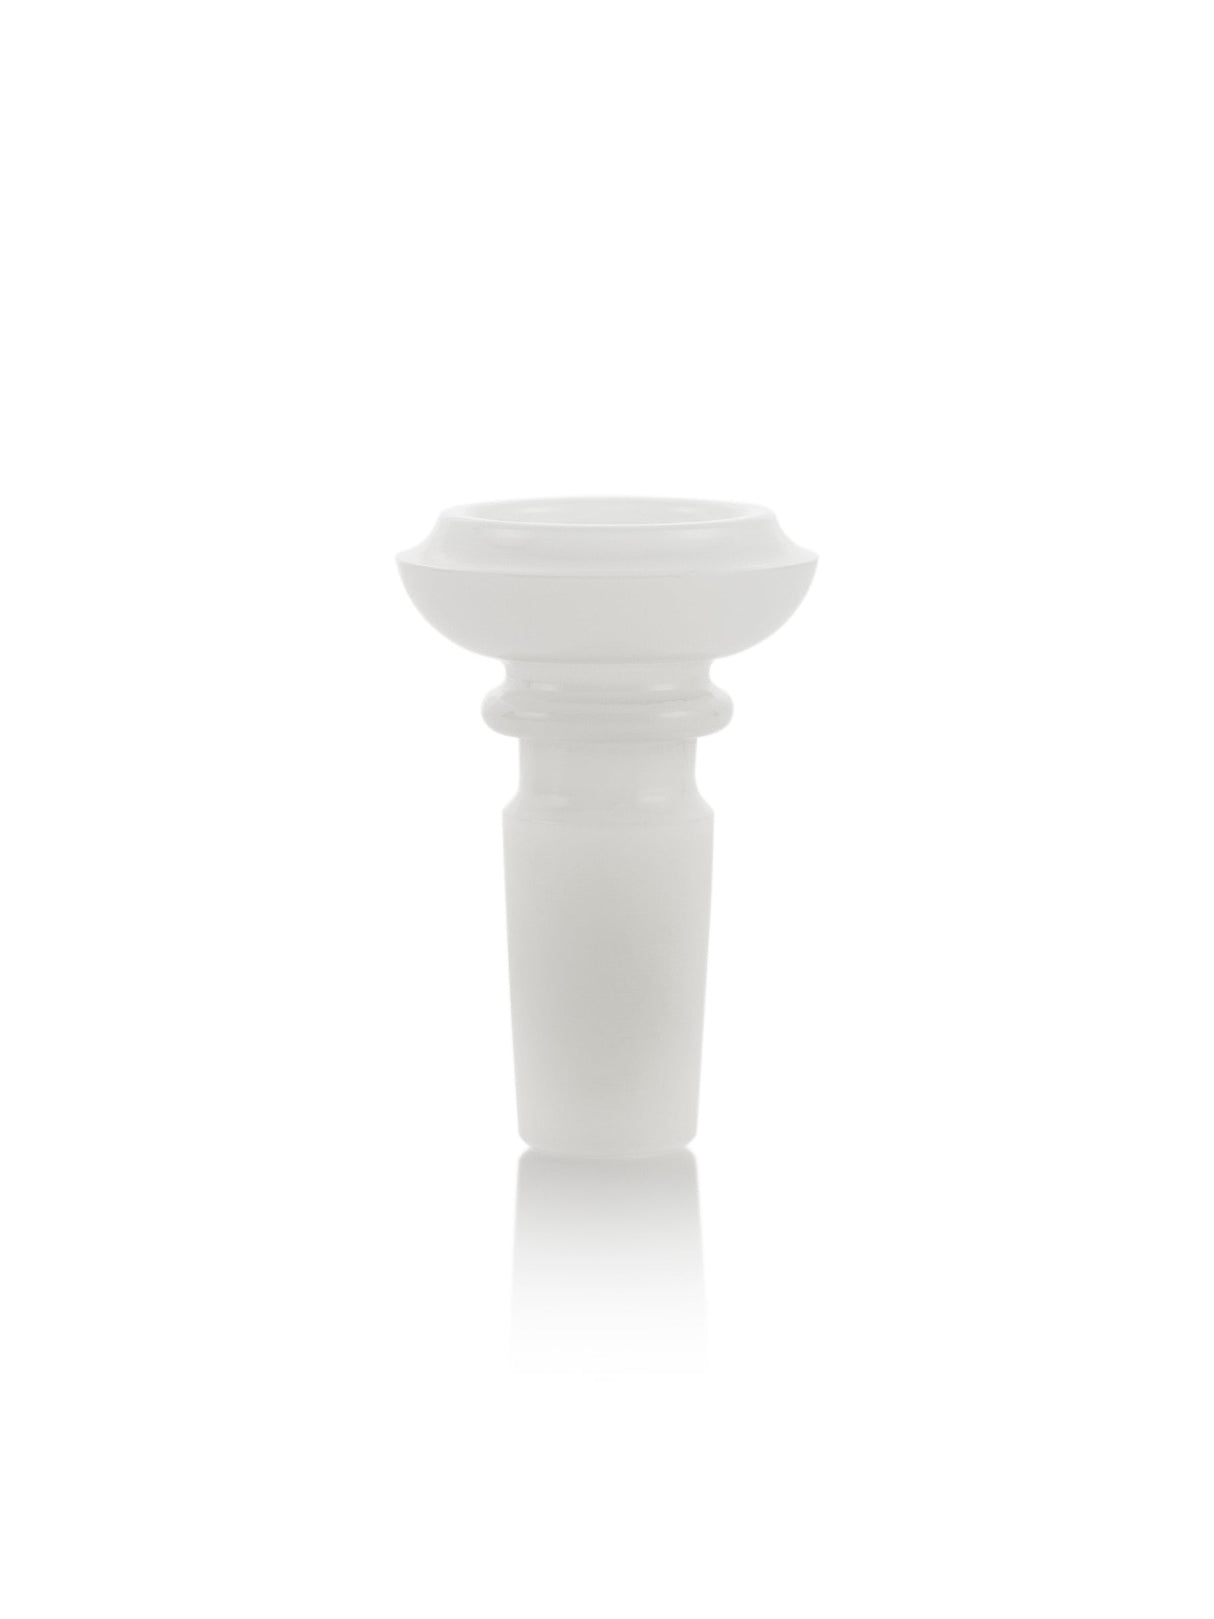 GRAV 14mm Basin Bowl in White - Front View on Seamless White Background